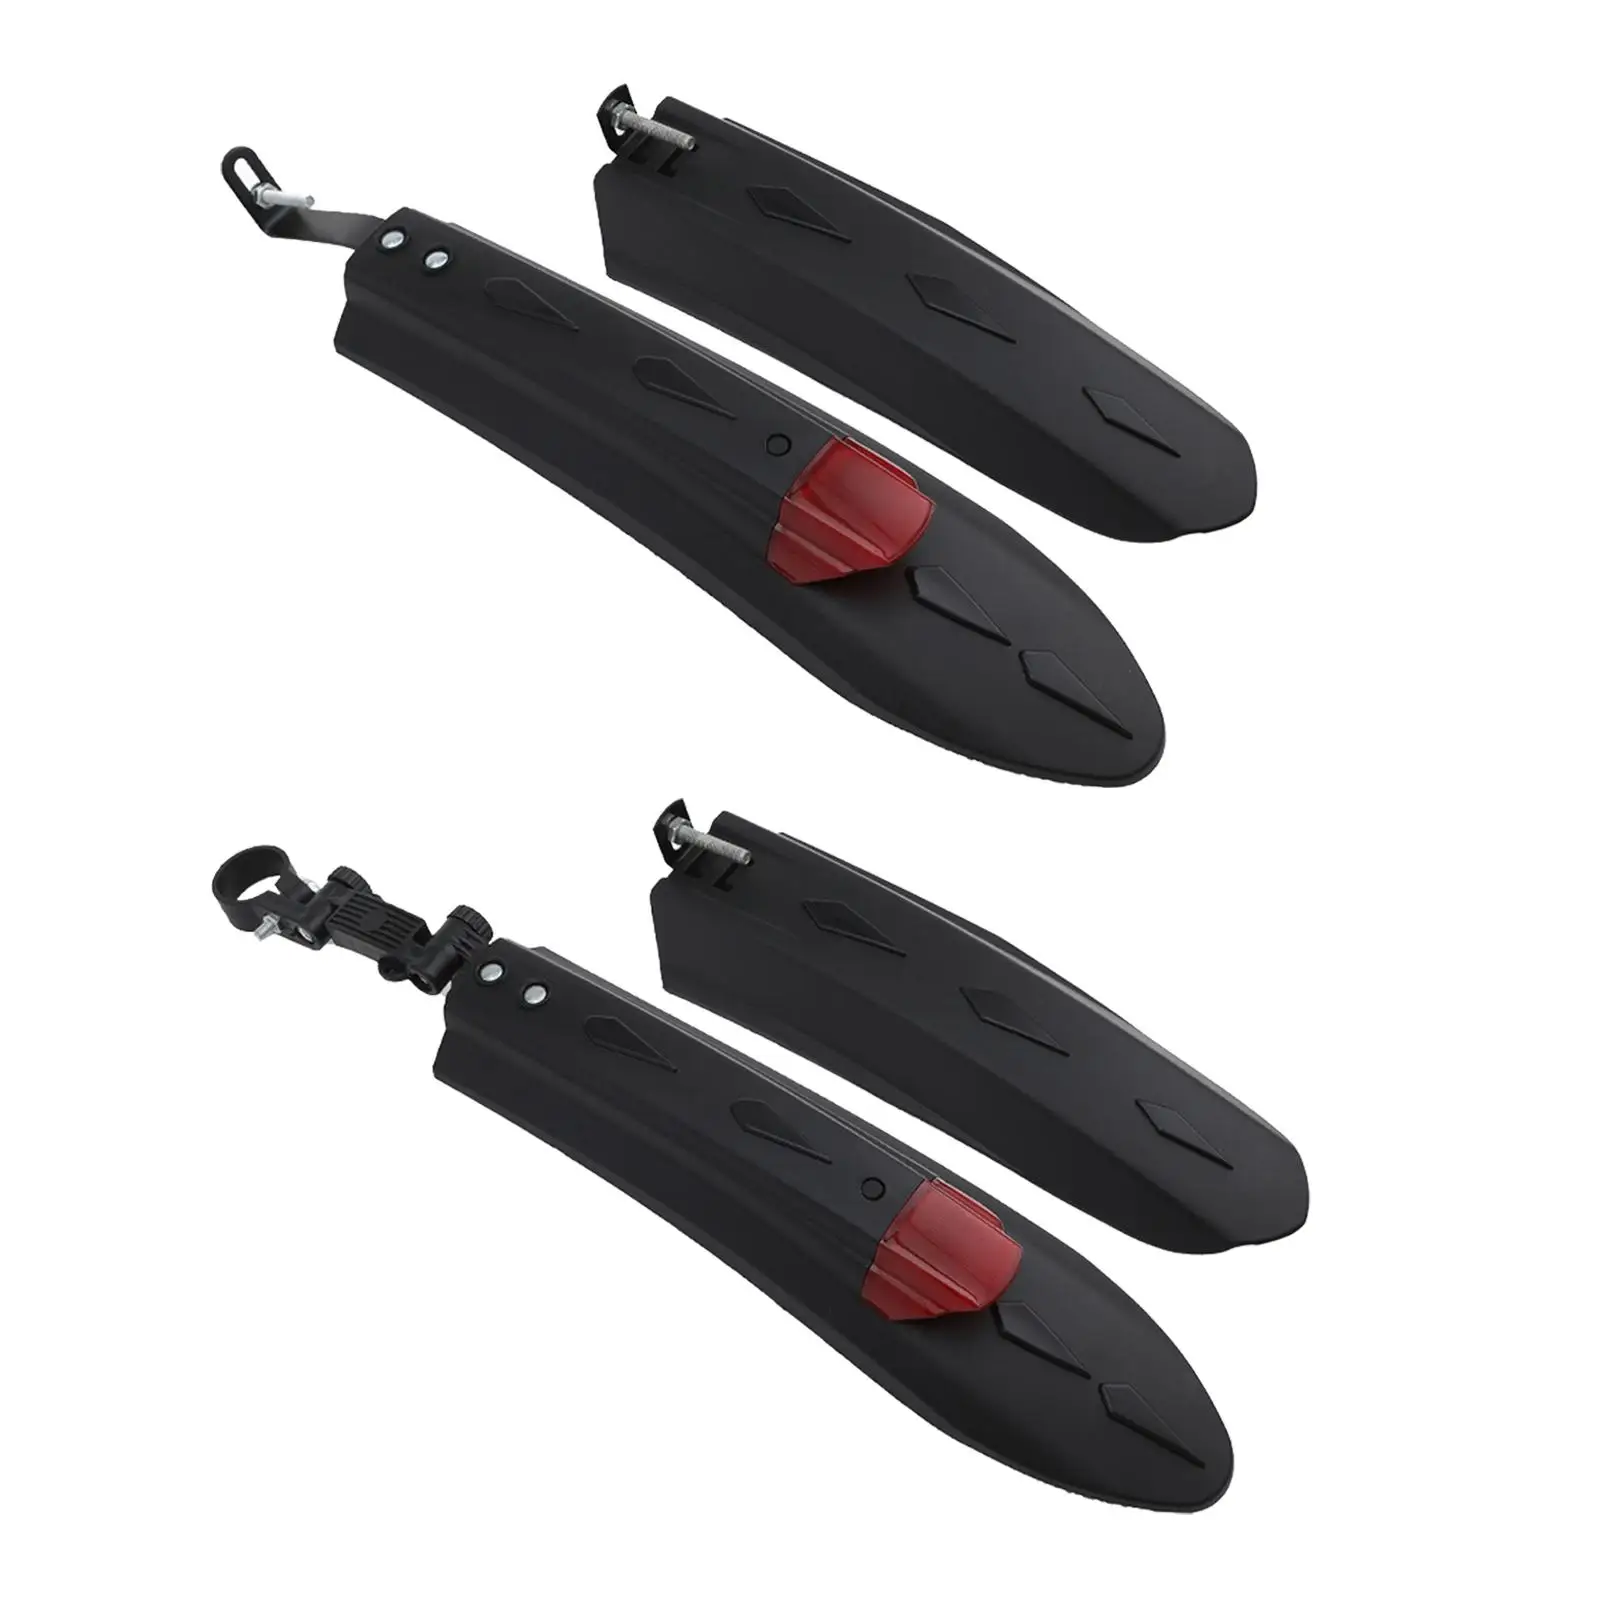 Bike Mudguard Front Rear Set, Bike Front & Rear Fenders, Portable Glow Mud Guard Mudflap for Outdoor Riding Travel Equipment